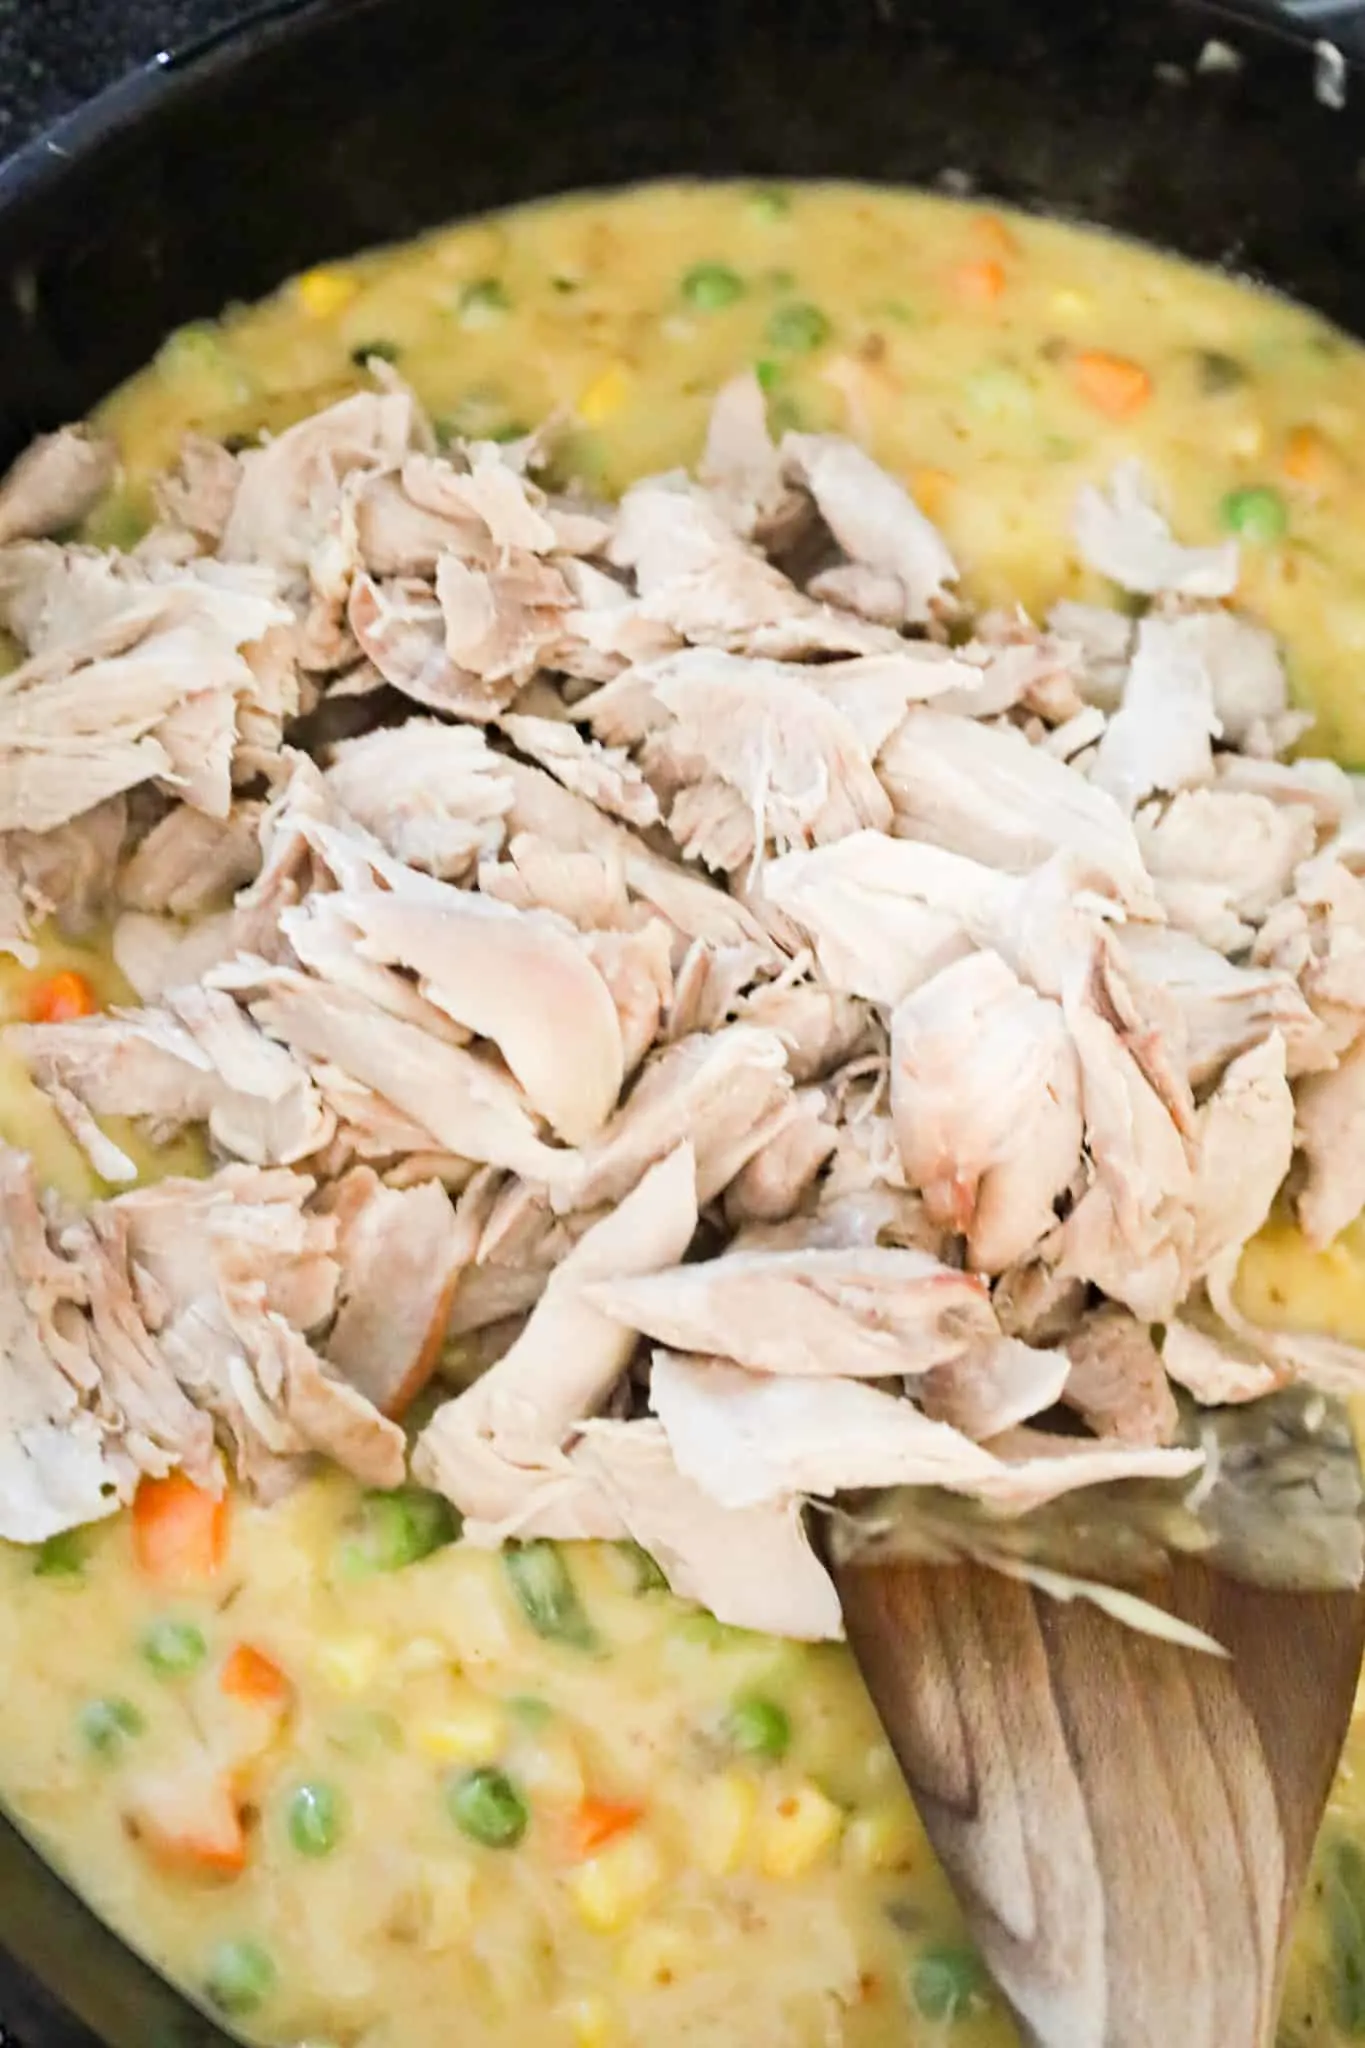 shredded turkey on top of vegetables and gravy mixture in a skillet